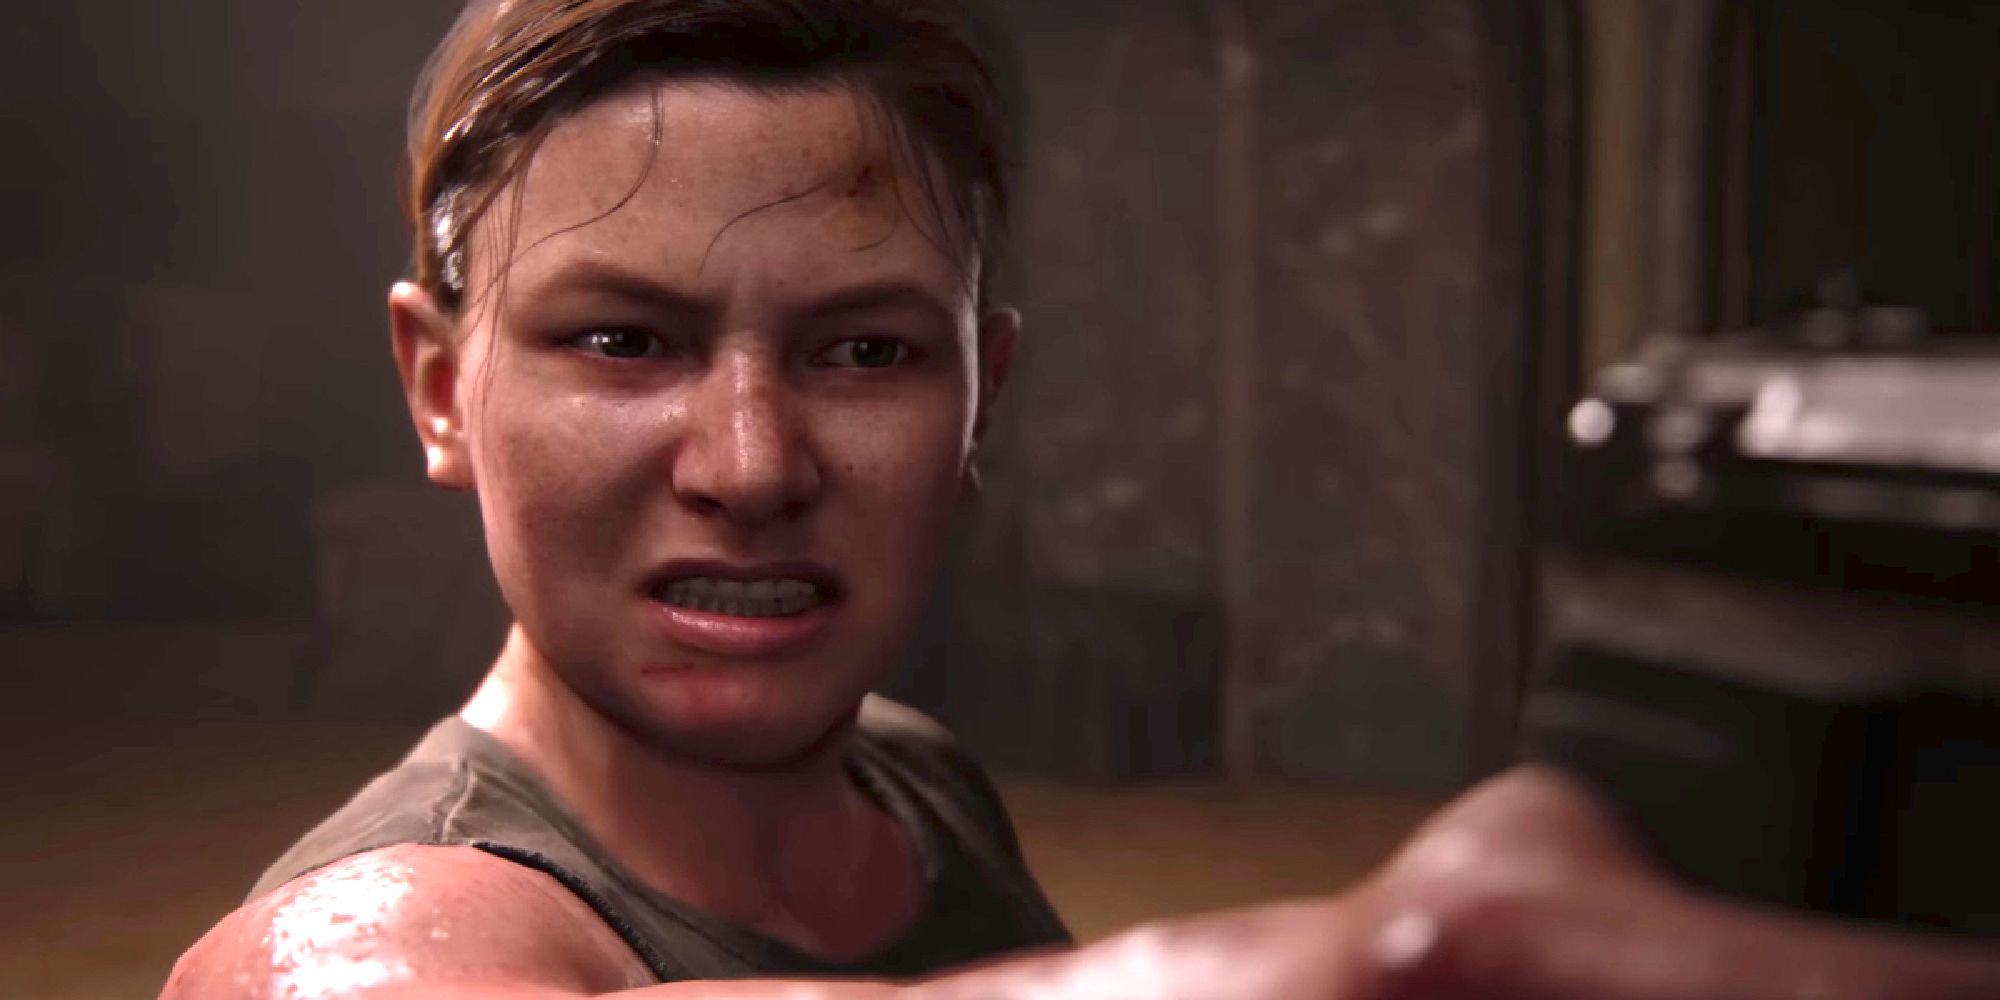 Abby from The Last of Us holding a gun with a grimace on her face.